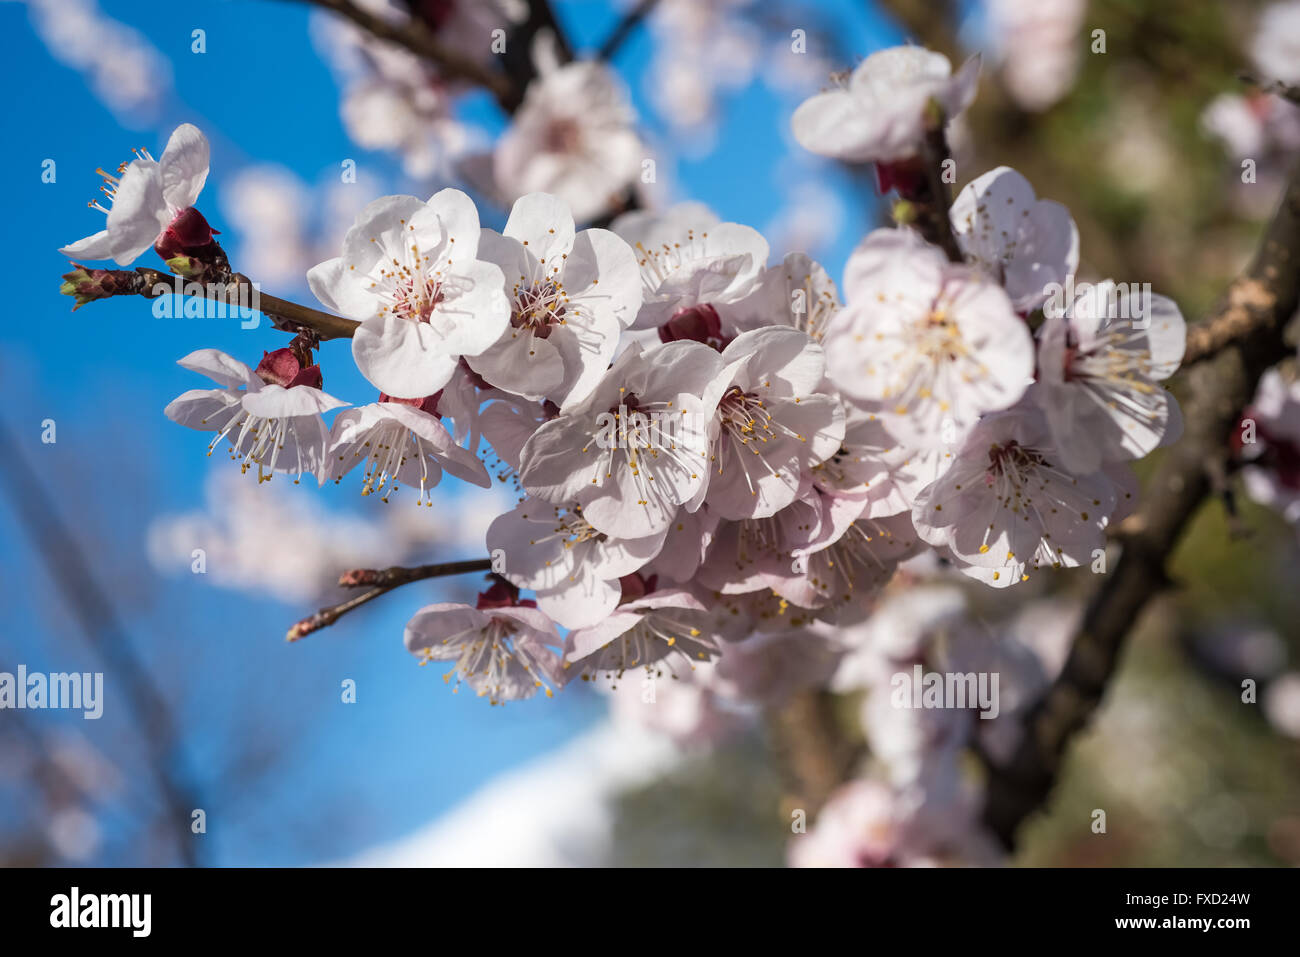 apricot flowers over blurred background Stock Photo